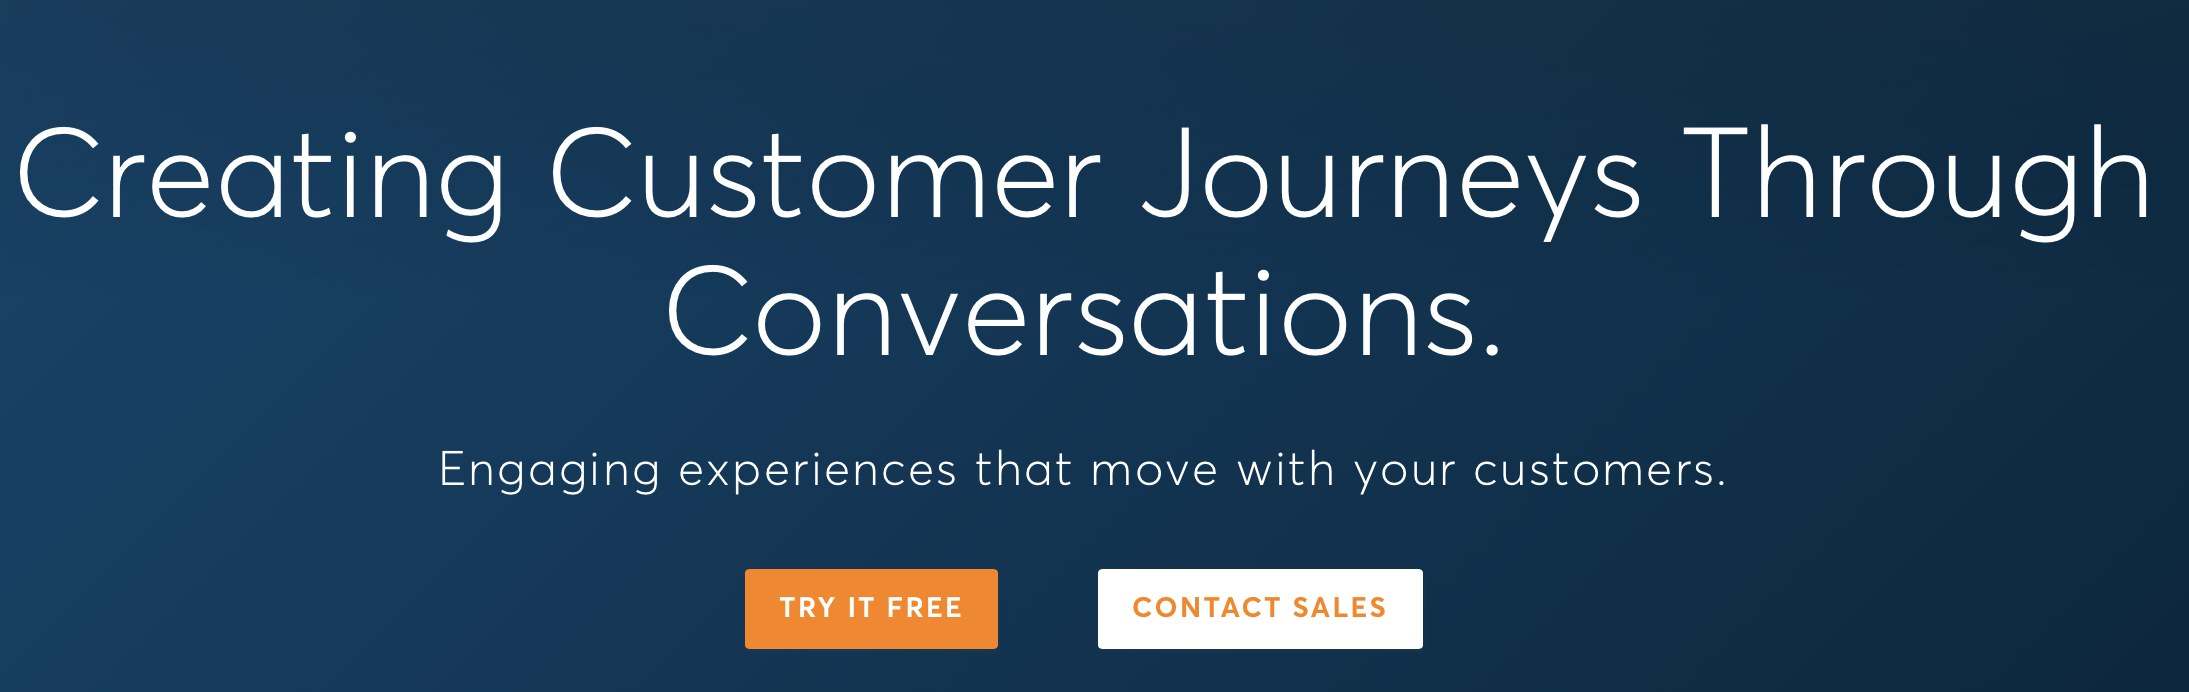 Creating customer journeys through conversations. Engaging experiences that move with your customers. Try it free. Contact Sales.